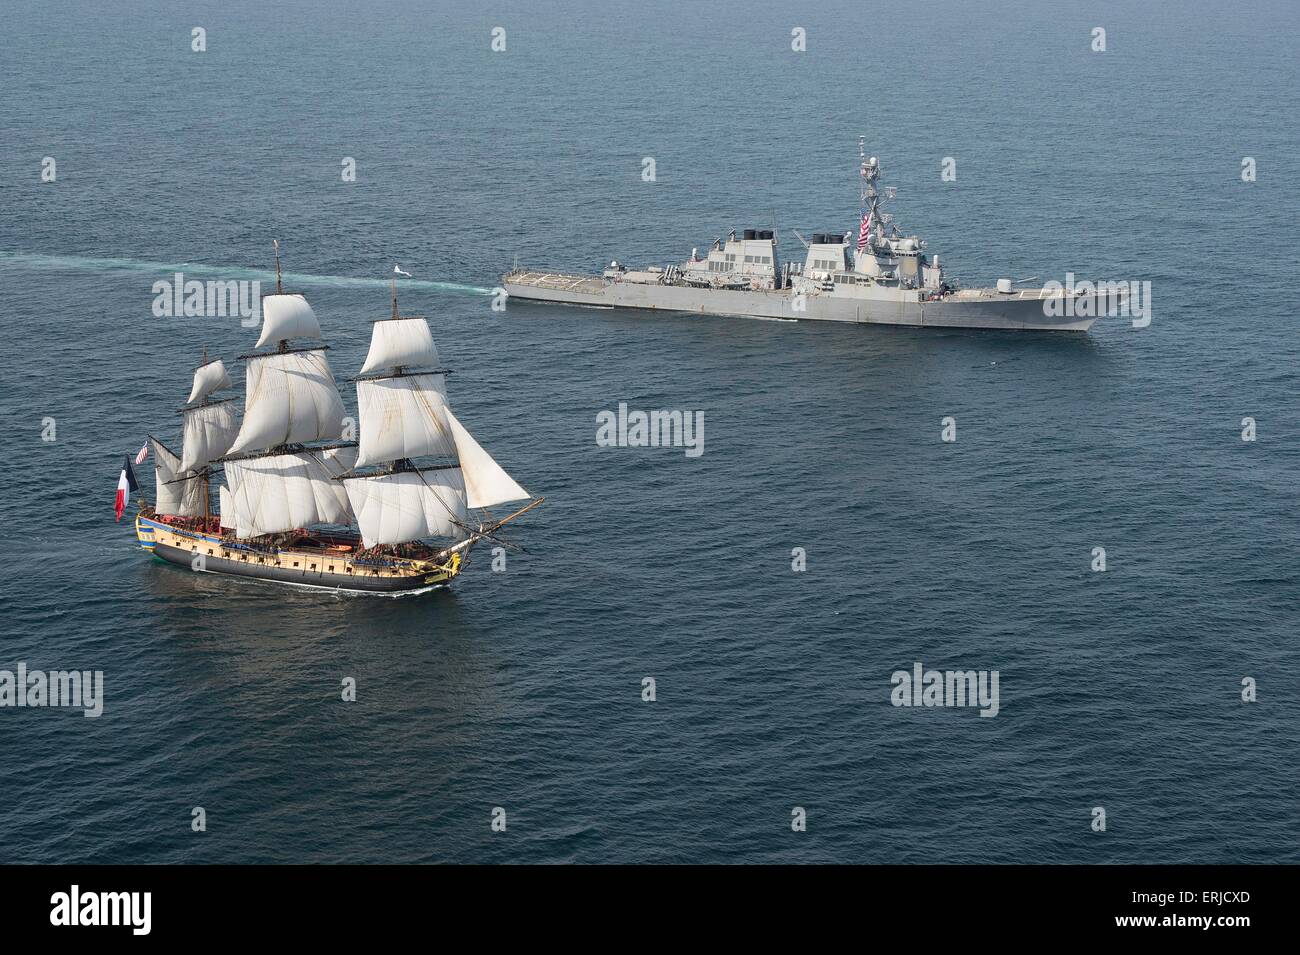 The US Navy Arleigh Burke-class guided-missile destroyer USS Mitscher escorts the French tall ship replica the Hermione in the vicinity of the Battle of Virginia Capes June 2, 2015 in the Chesapeake Bay, Virginia. The original the Hermione brought French Gen. Marquis de Lafayette to America in support of the American Revolutionary War. The symbolic return of the Hermione will pay homage to Lafayette and the Franco-American alliance that brought victory at the Battle of Yorktown in 1781. Stock Photo